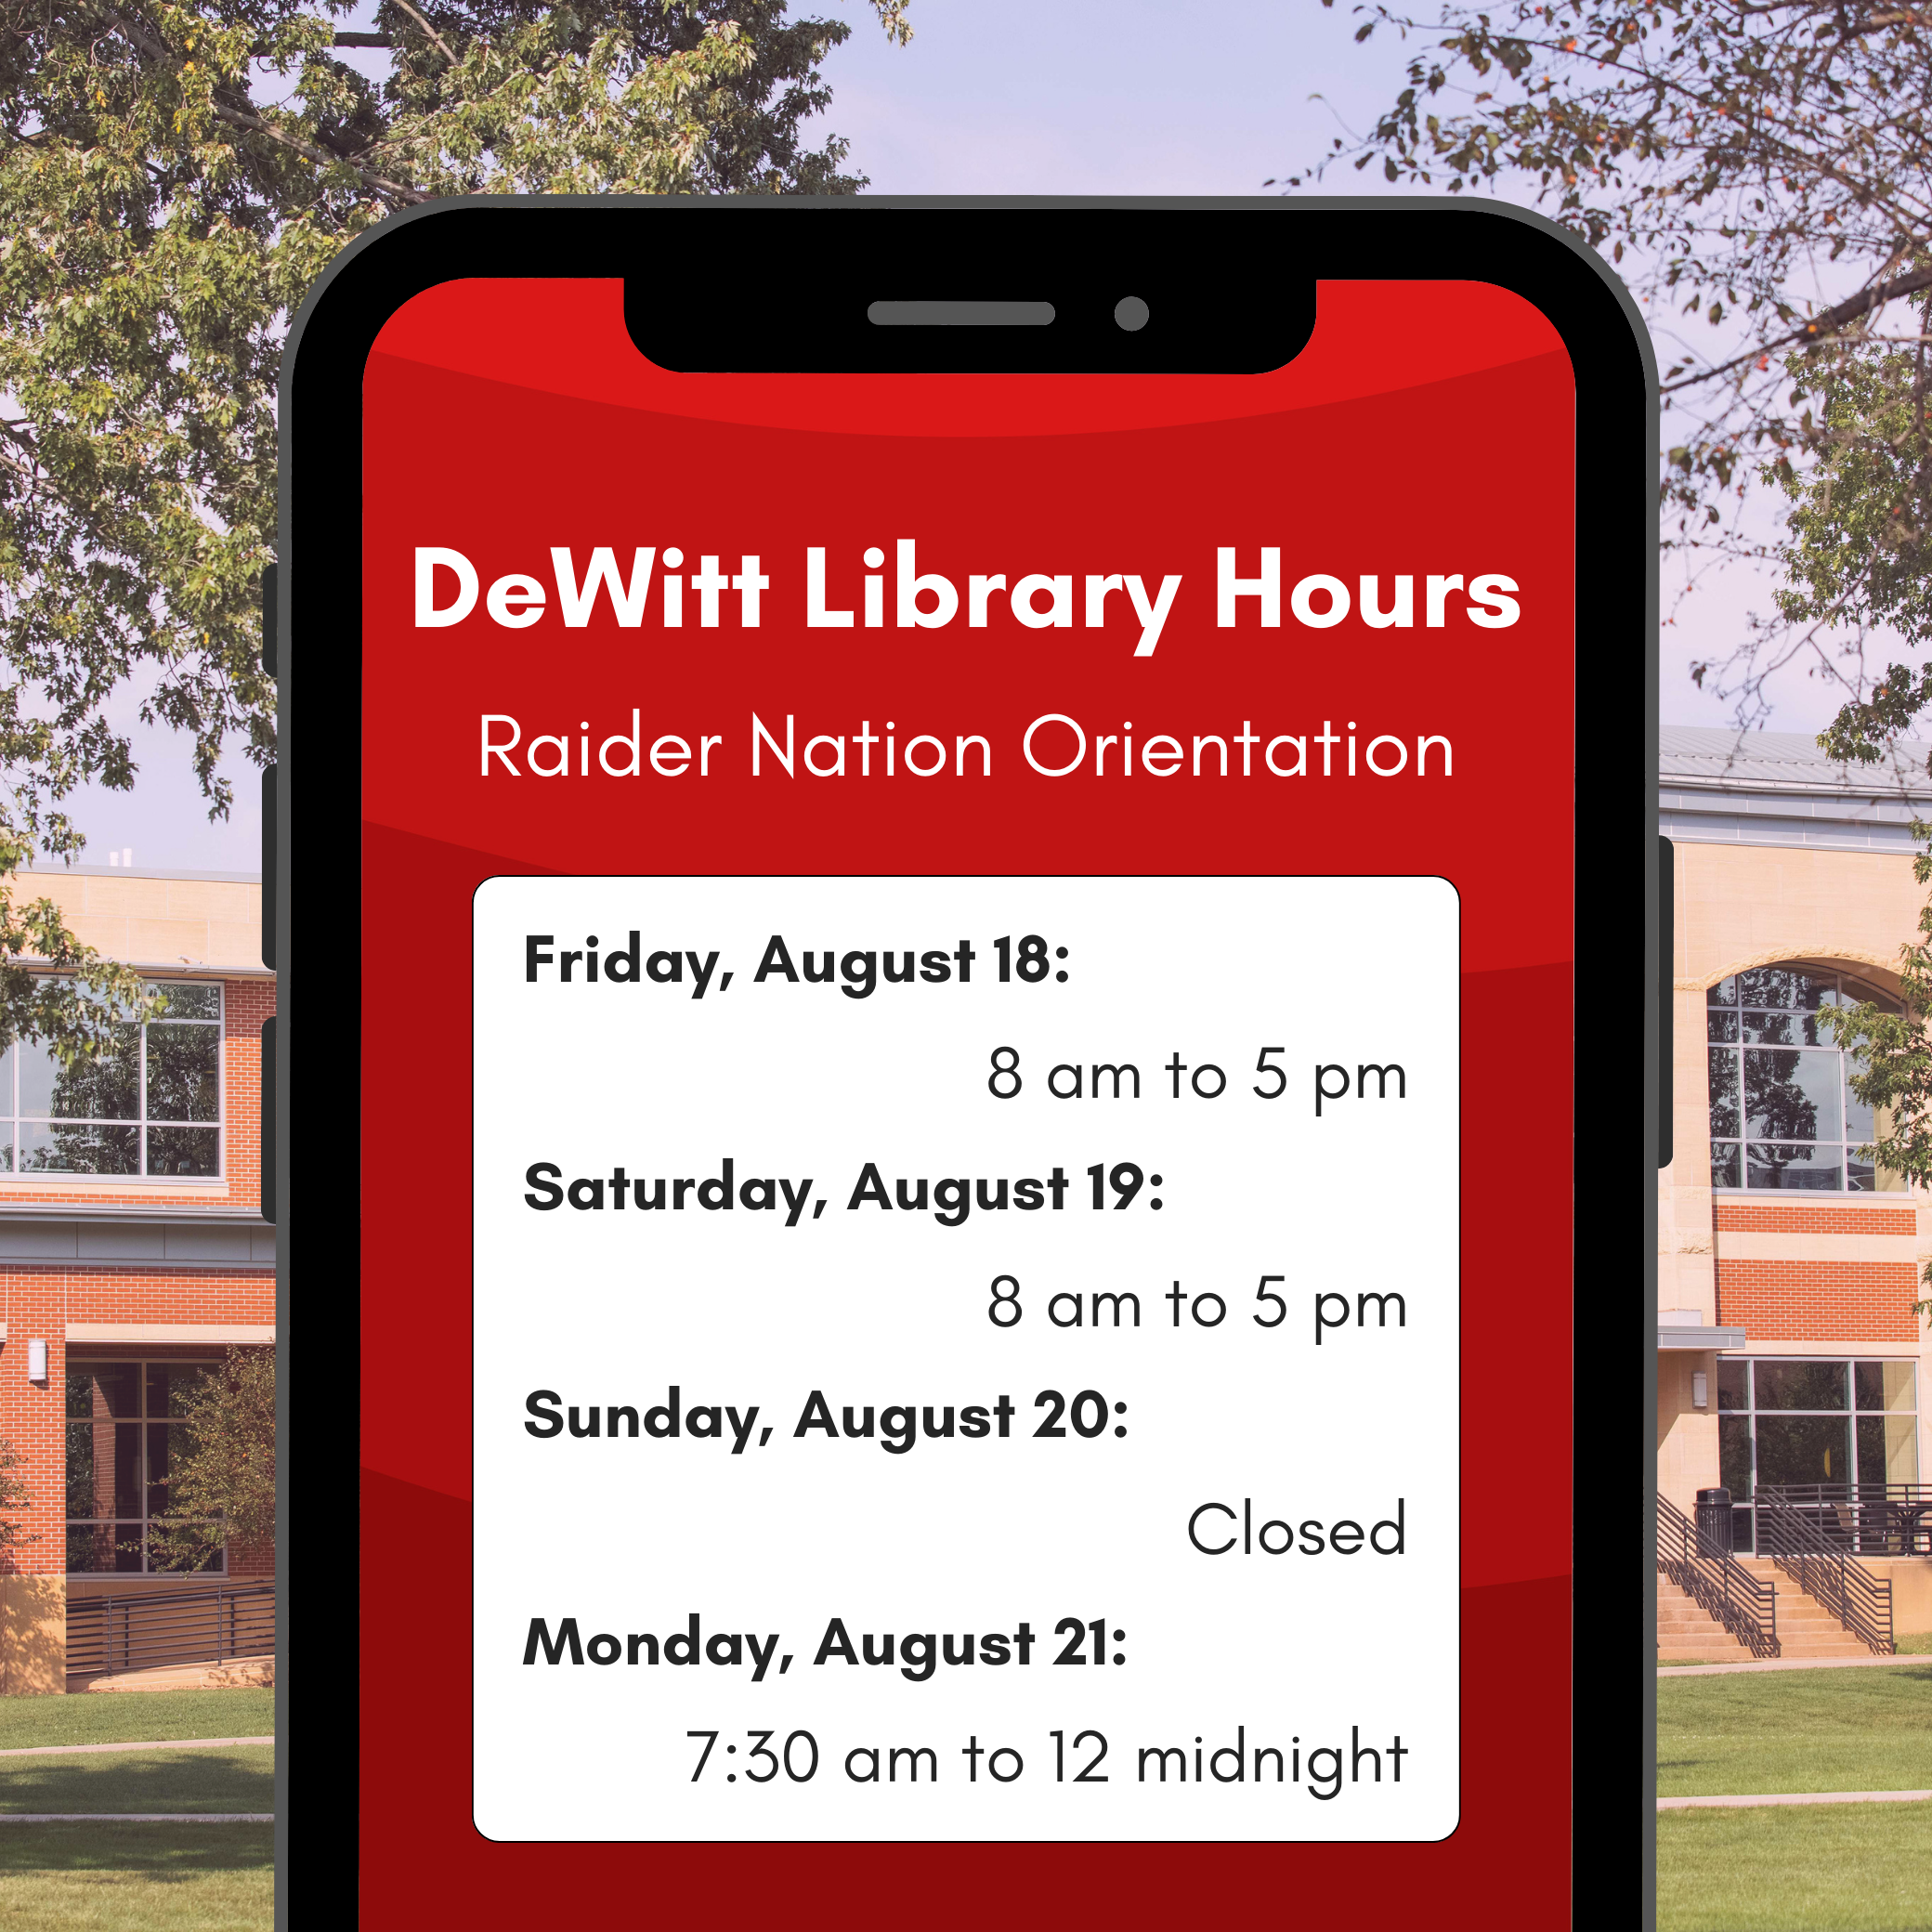 DeWitt Library Hours - Raider Nation Orientation: Friday, August 18:  8 am to 5 pm Saturday, August 19:  8 am to 5 pm Sunday, August 20:  Closed Monday, August 21:  7:30 am to 12 midnight